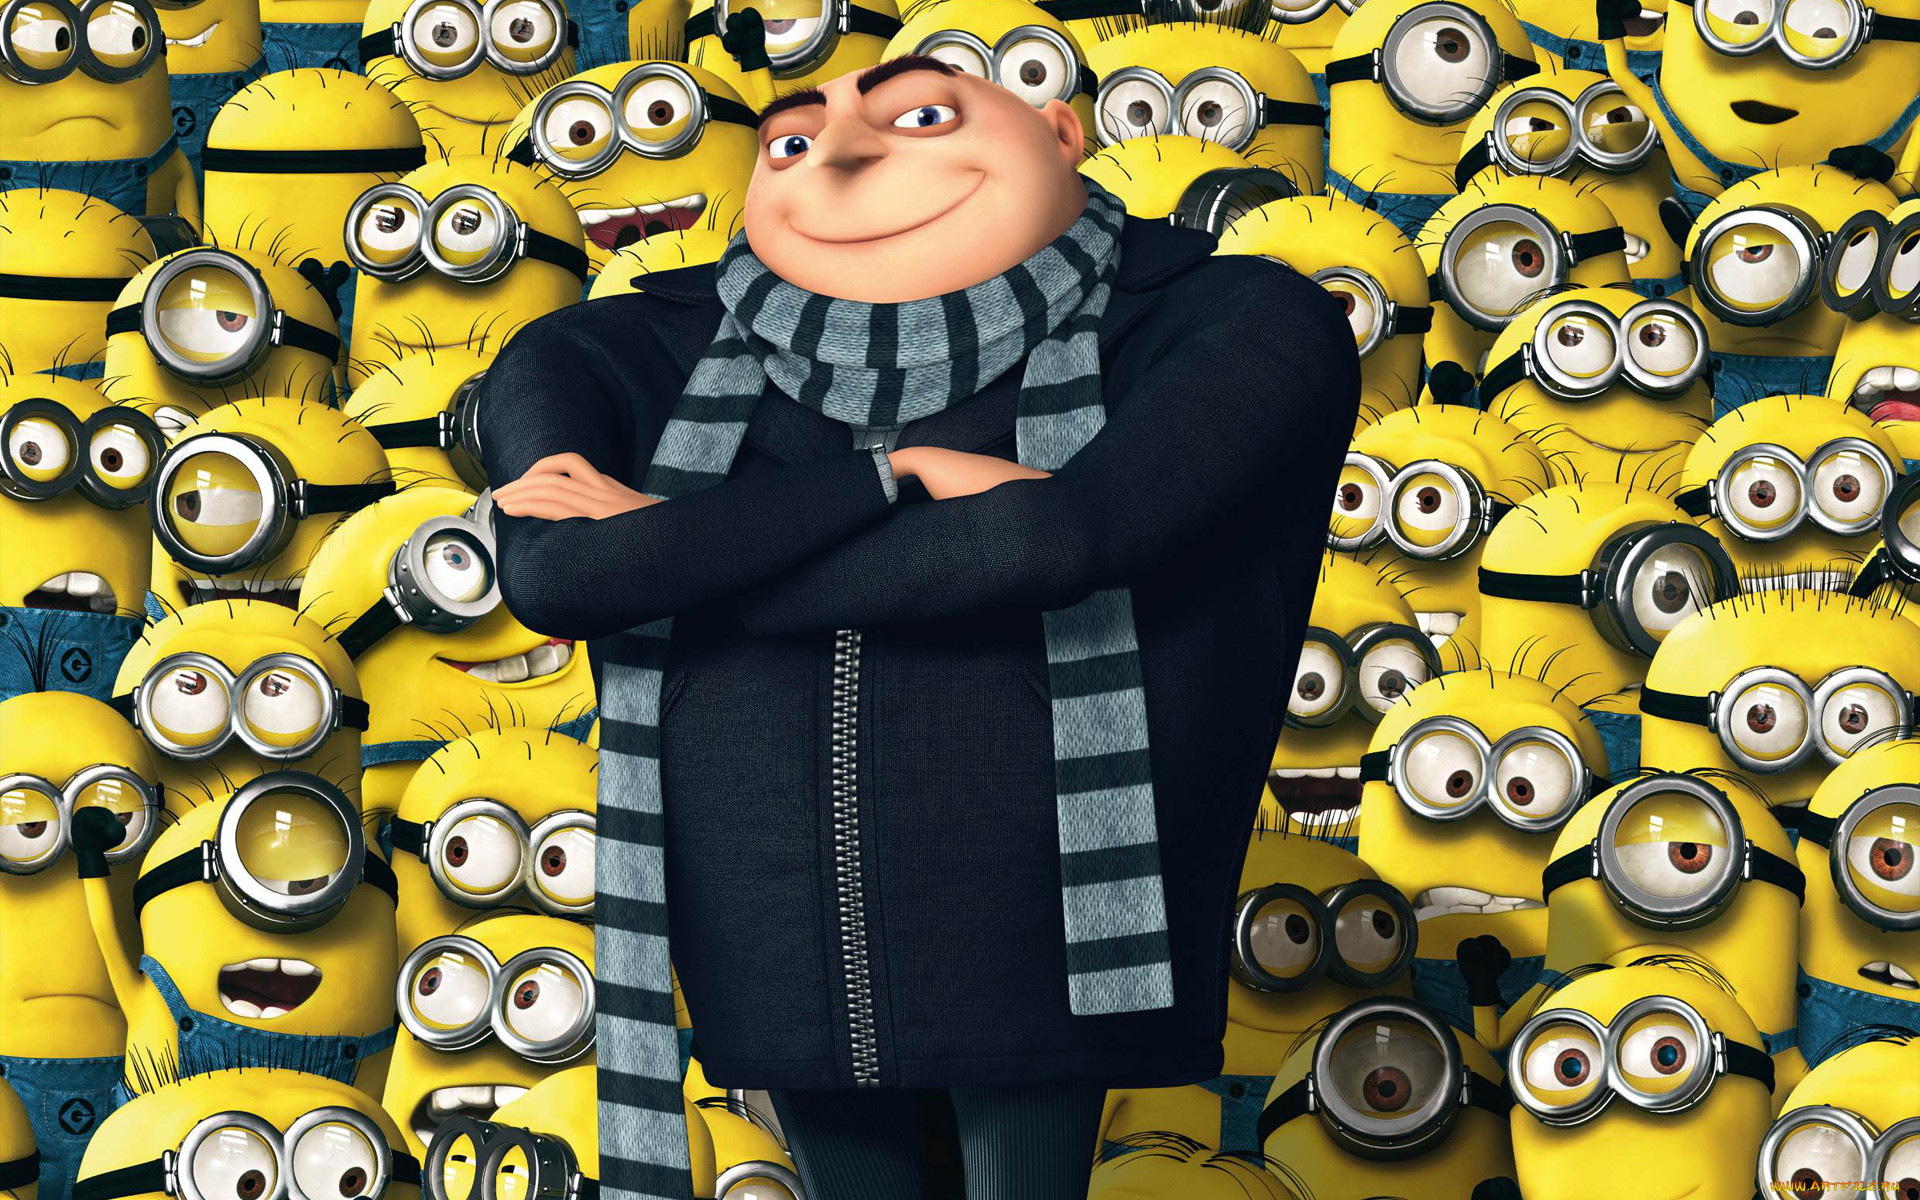 Pictures of gru from despicable me - 🧡 Pictures Of Gru From...